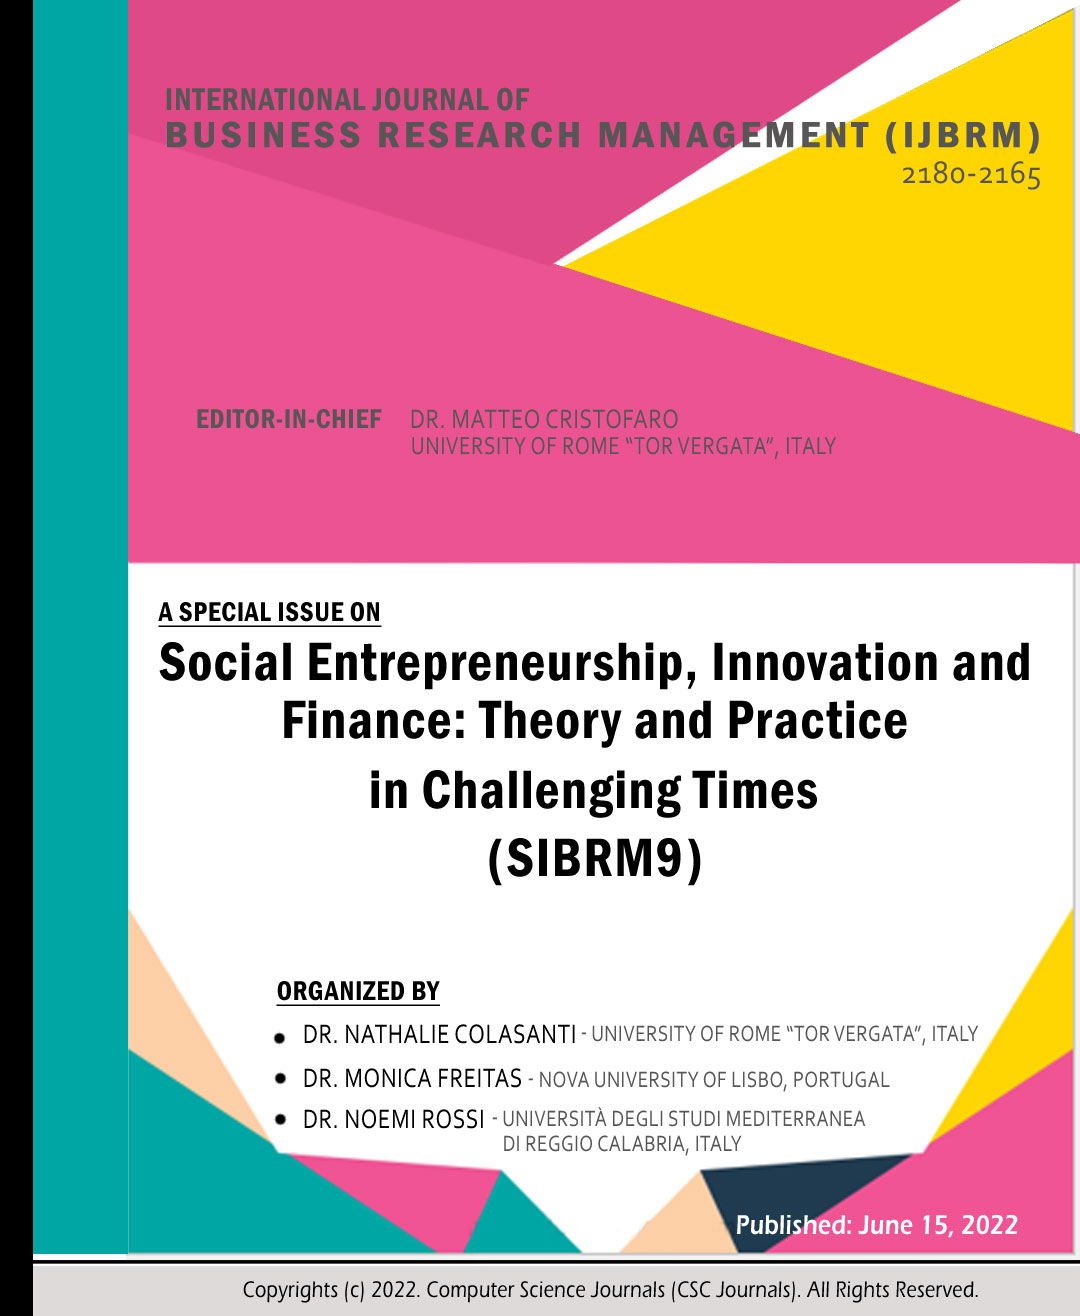 Social Entrepreneurship, Innovation and Finance: Theory and Practice in Challenging Times (SIBRM9)